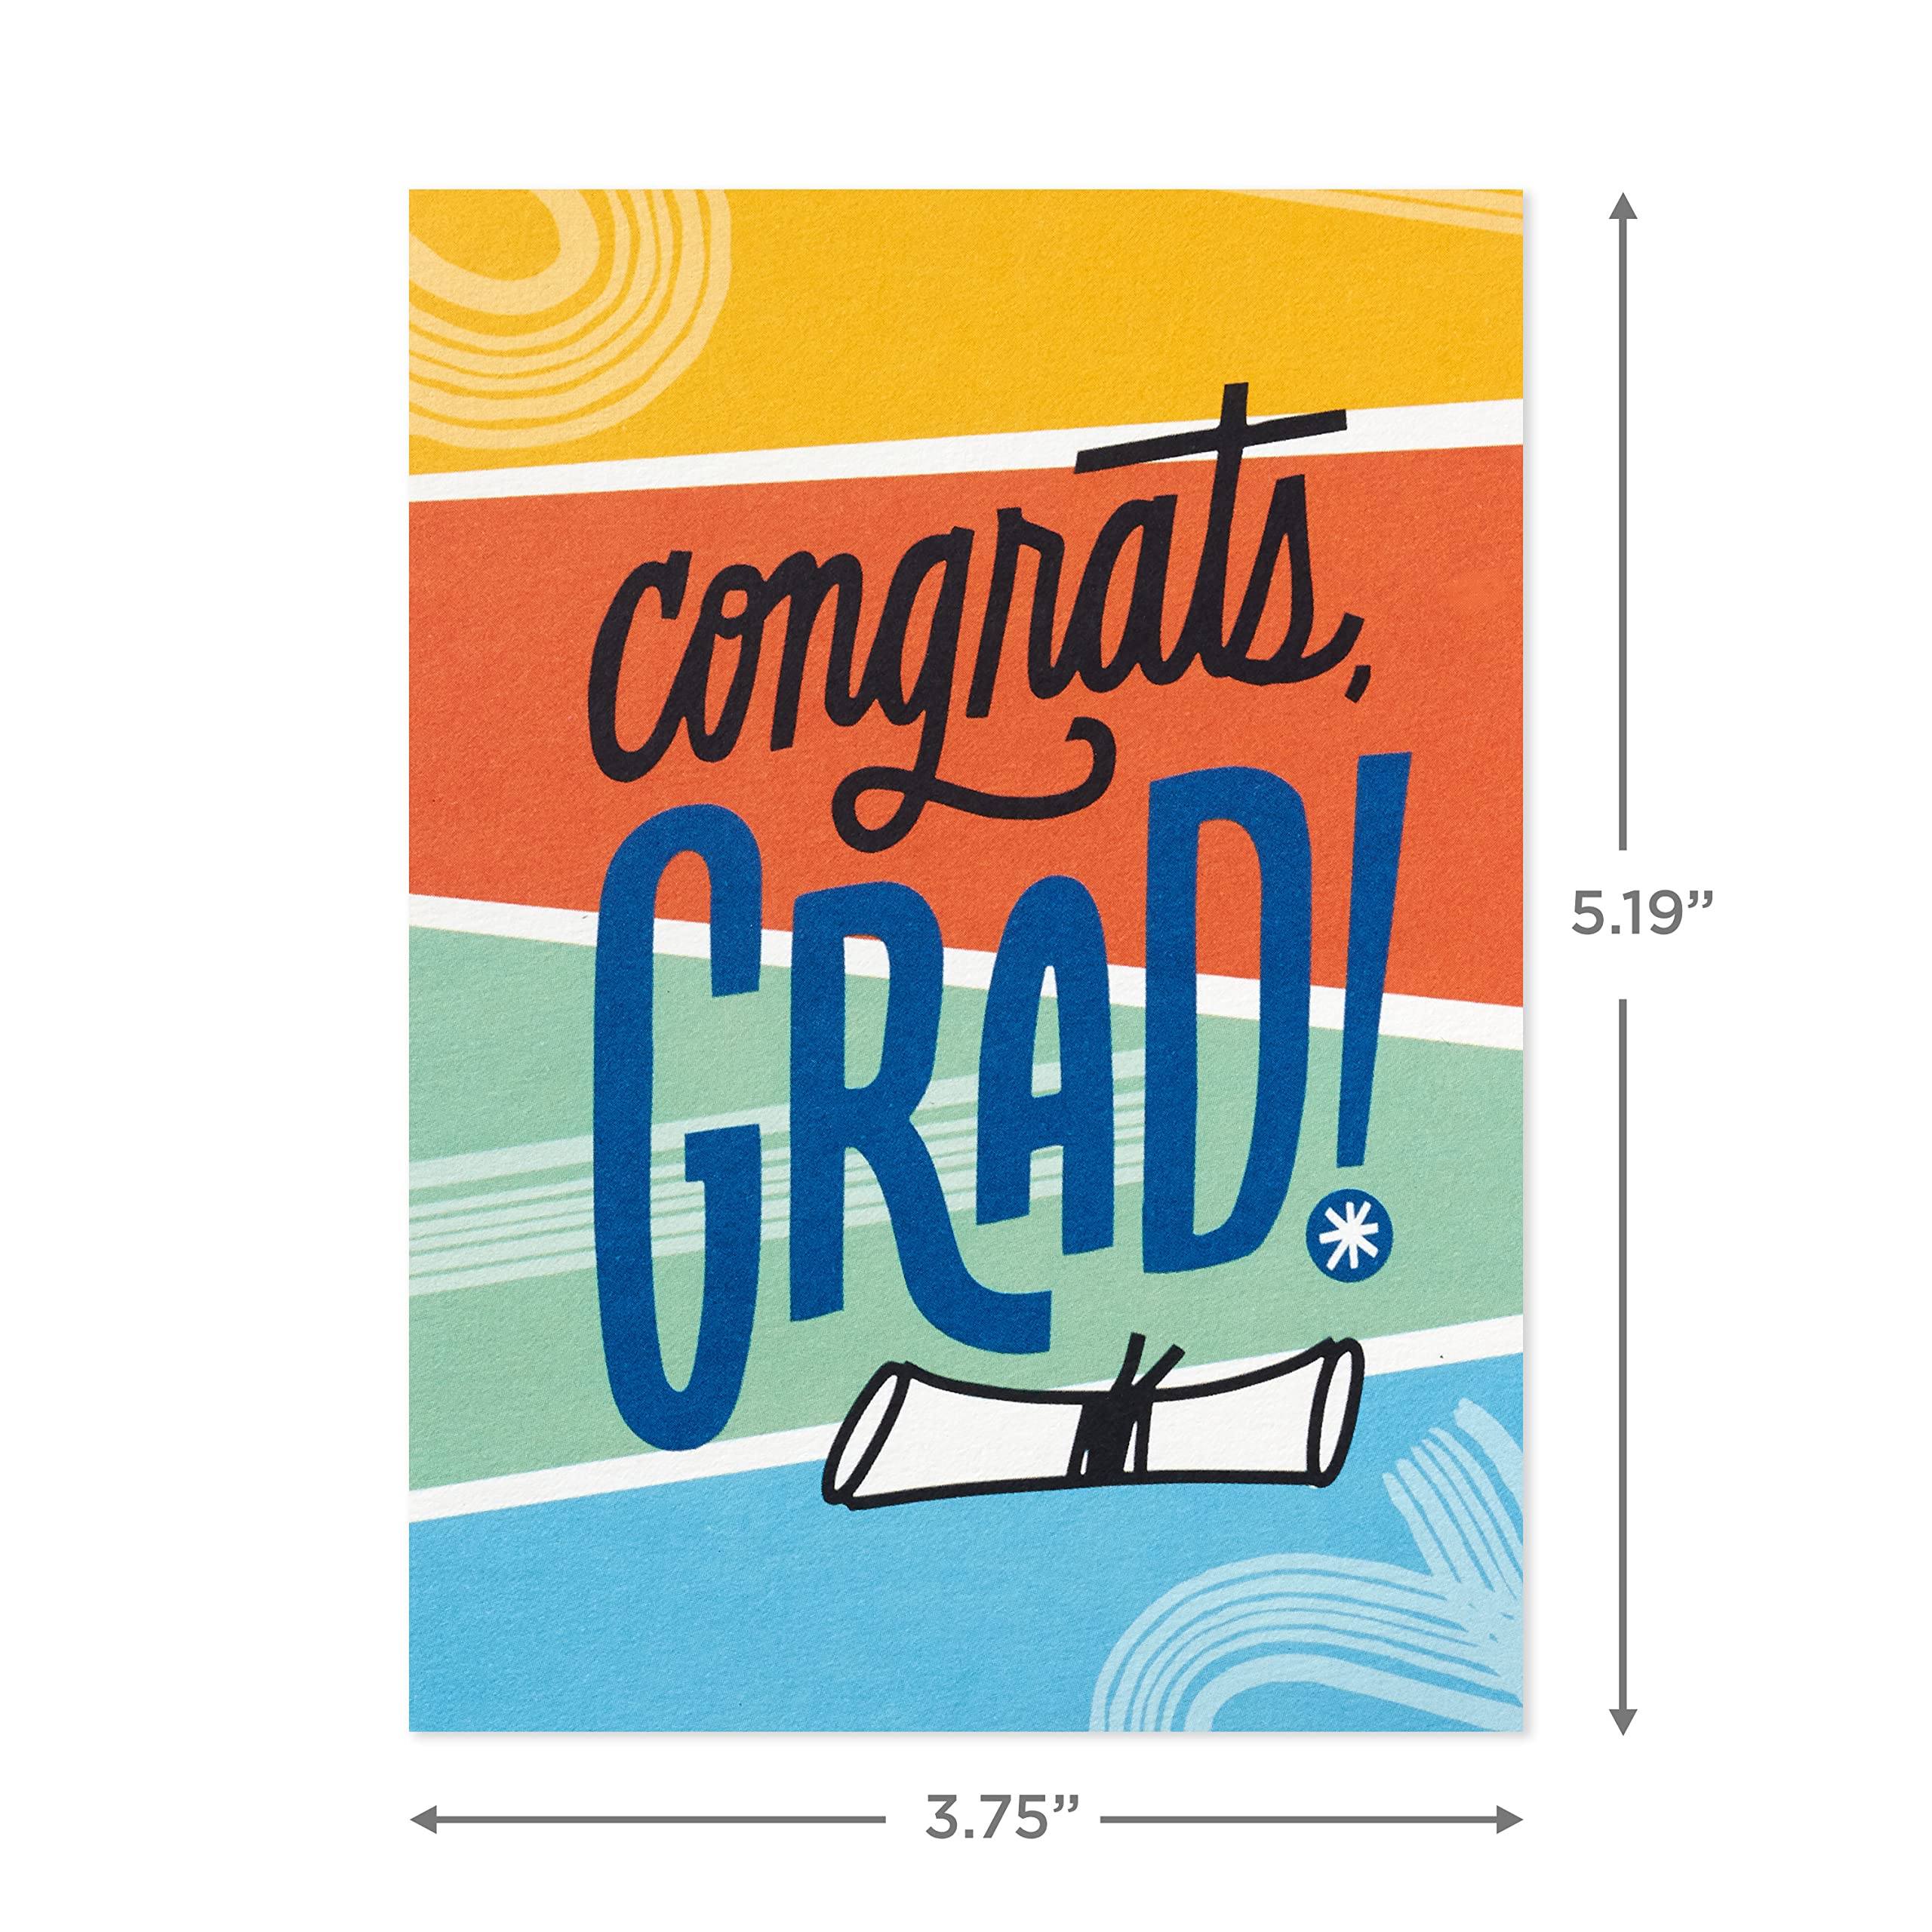 Hallmark Graduation Cards Assortment, Here's to the Future (36 Cards and Envelopes, 6 Designs)